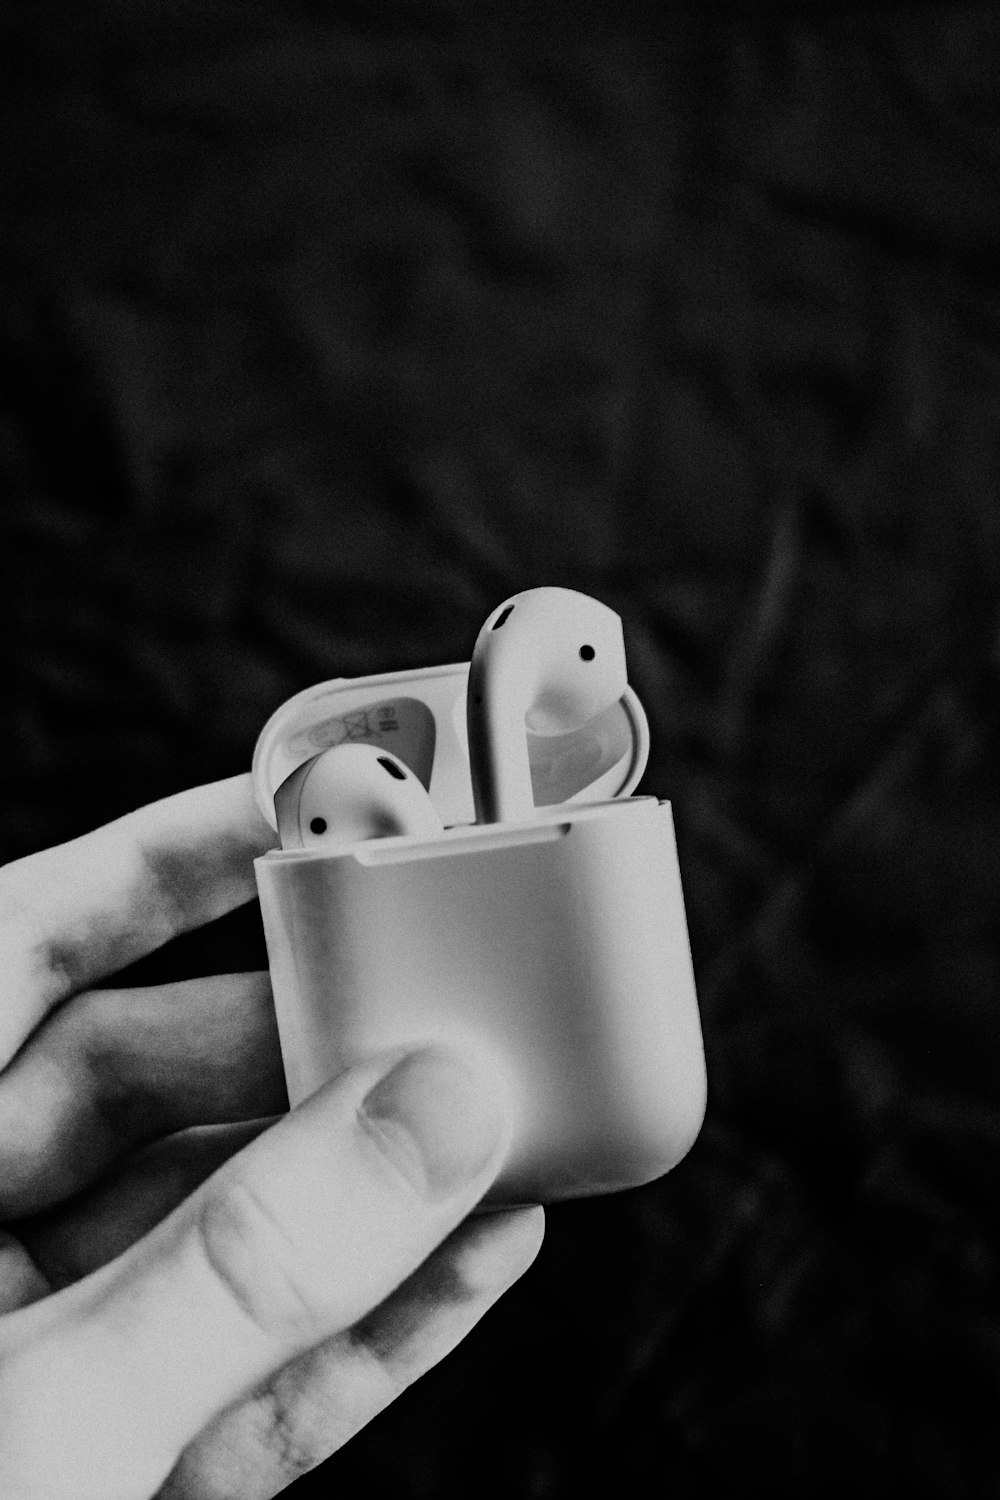 a hand holding an apple airpods in a cup